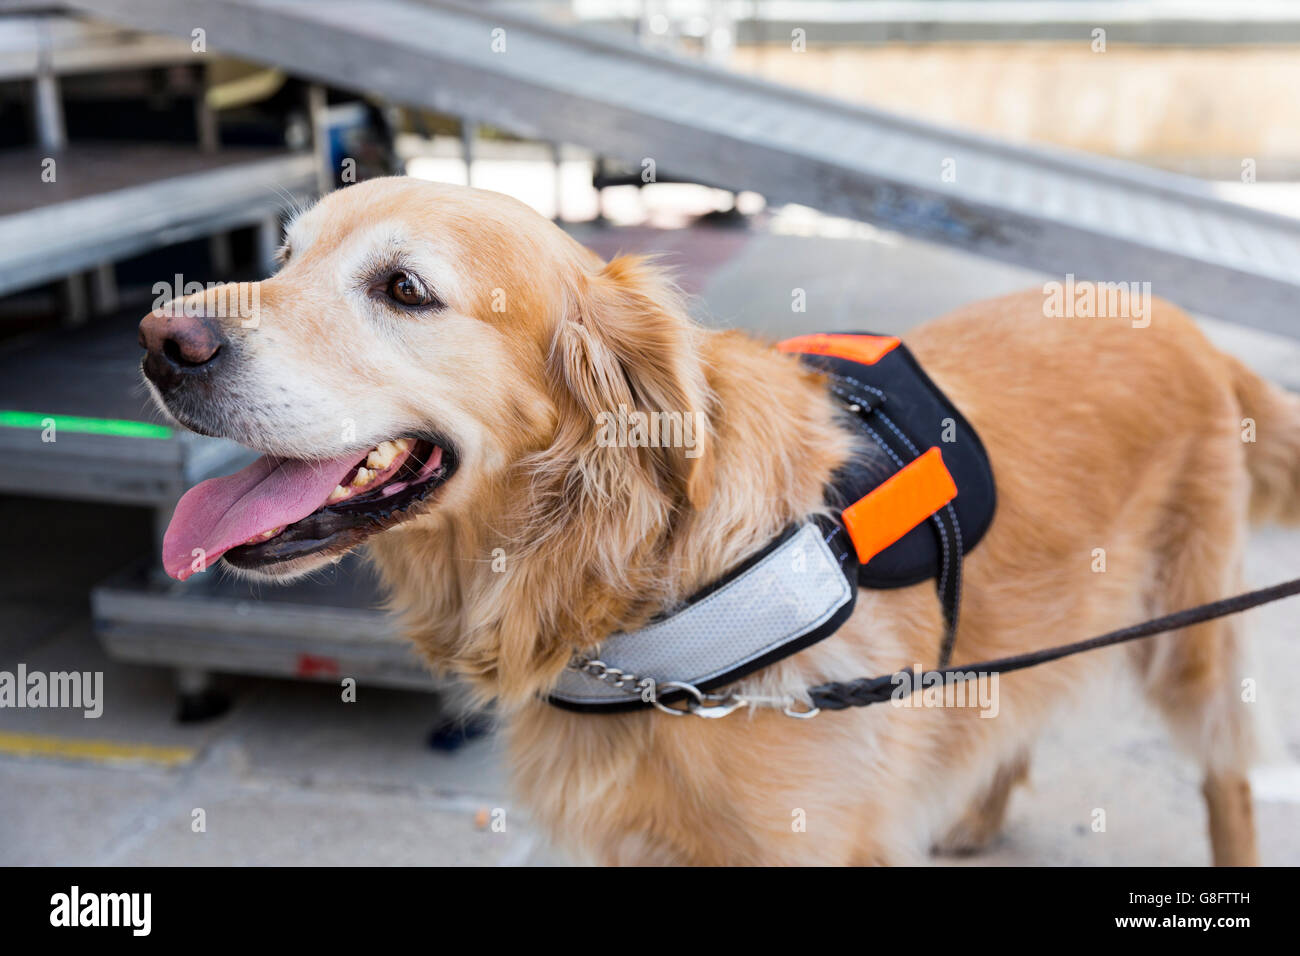 An assistance dog is trained to aid or assist an individual with a disability. Many are trained by an assistance dog organizatio Stock Photo